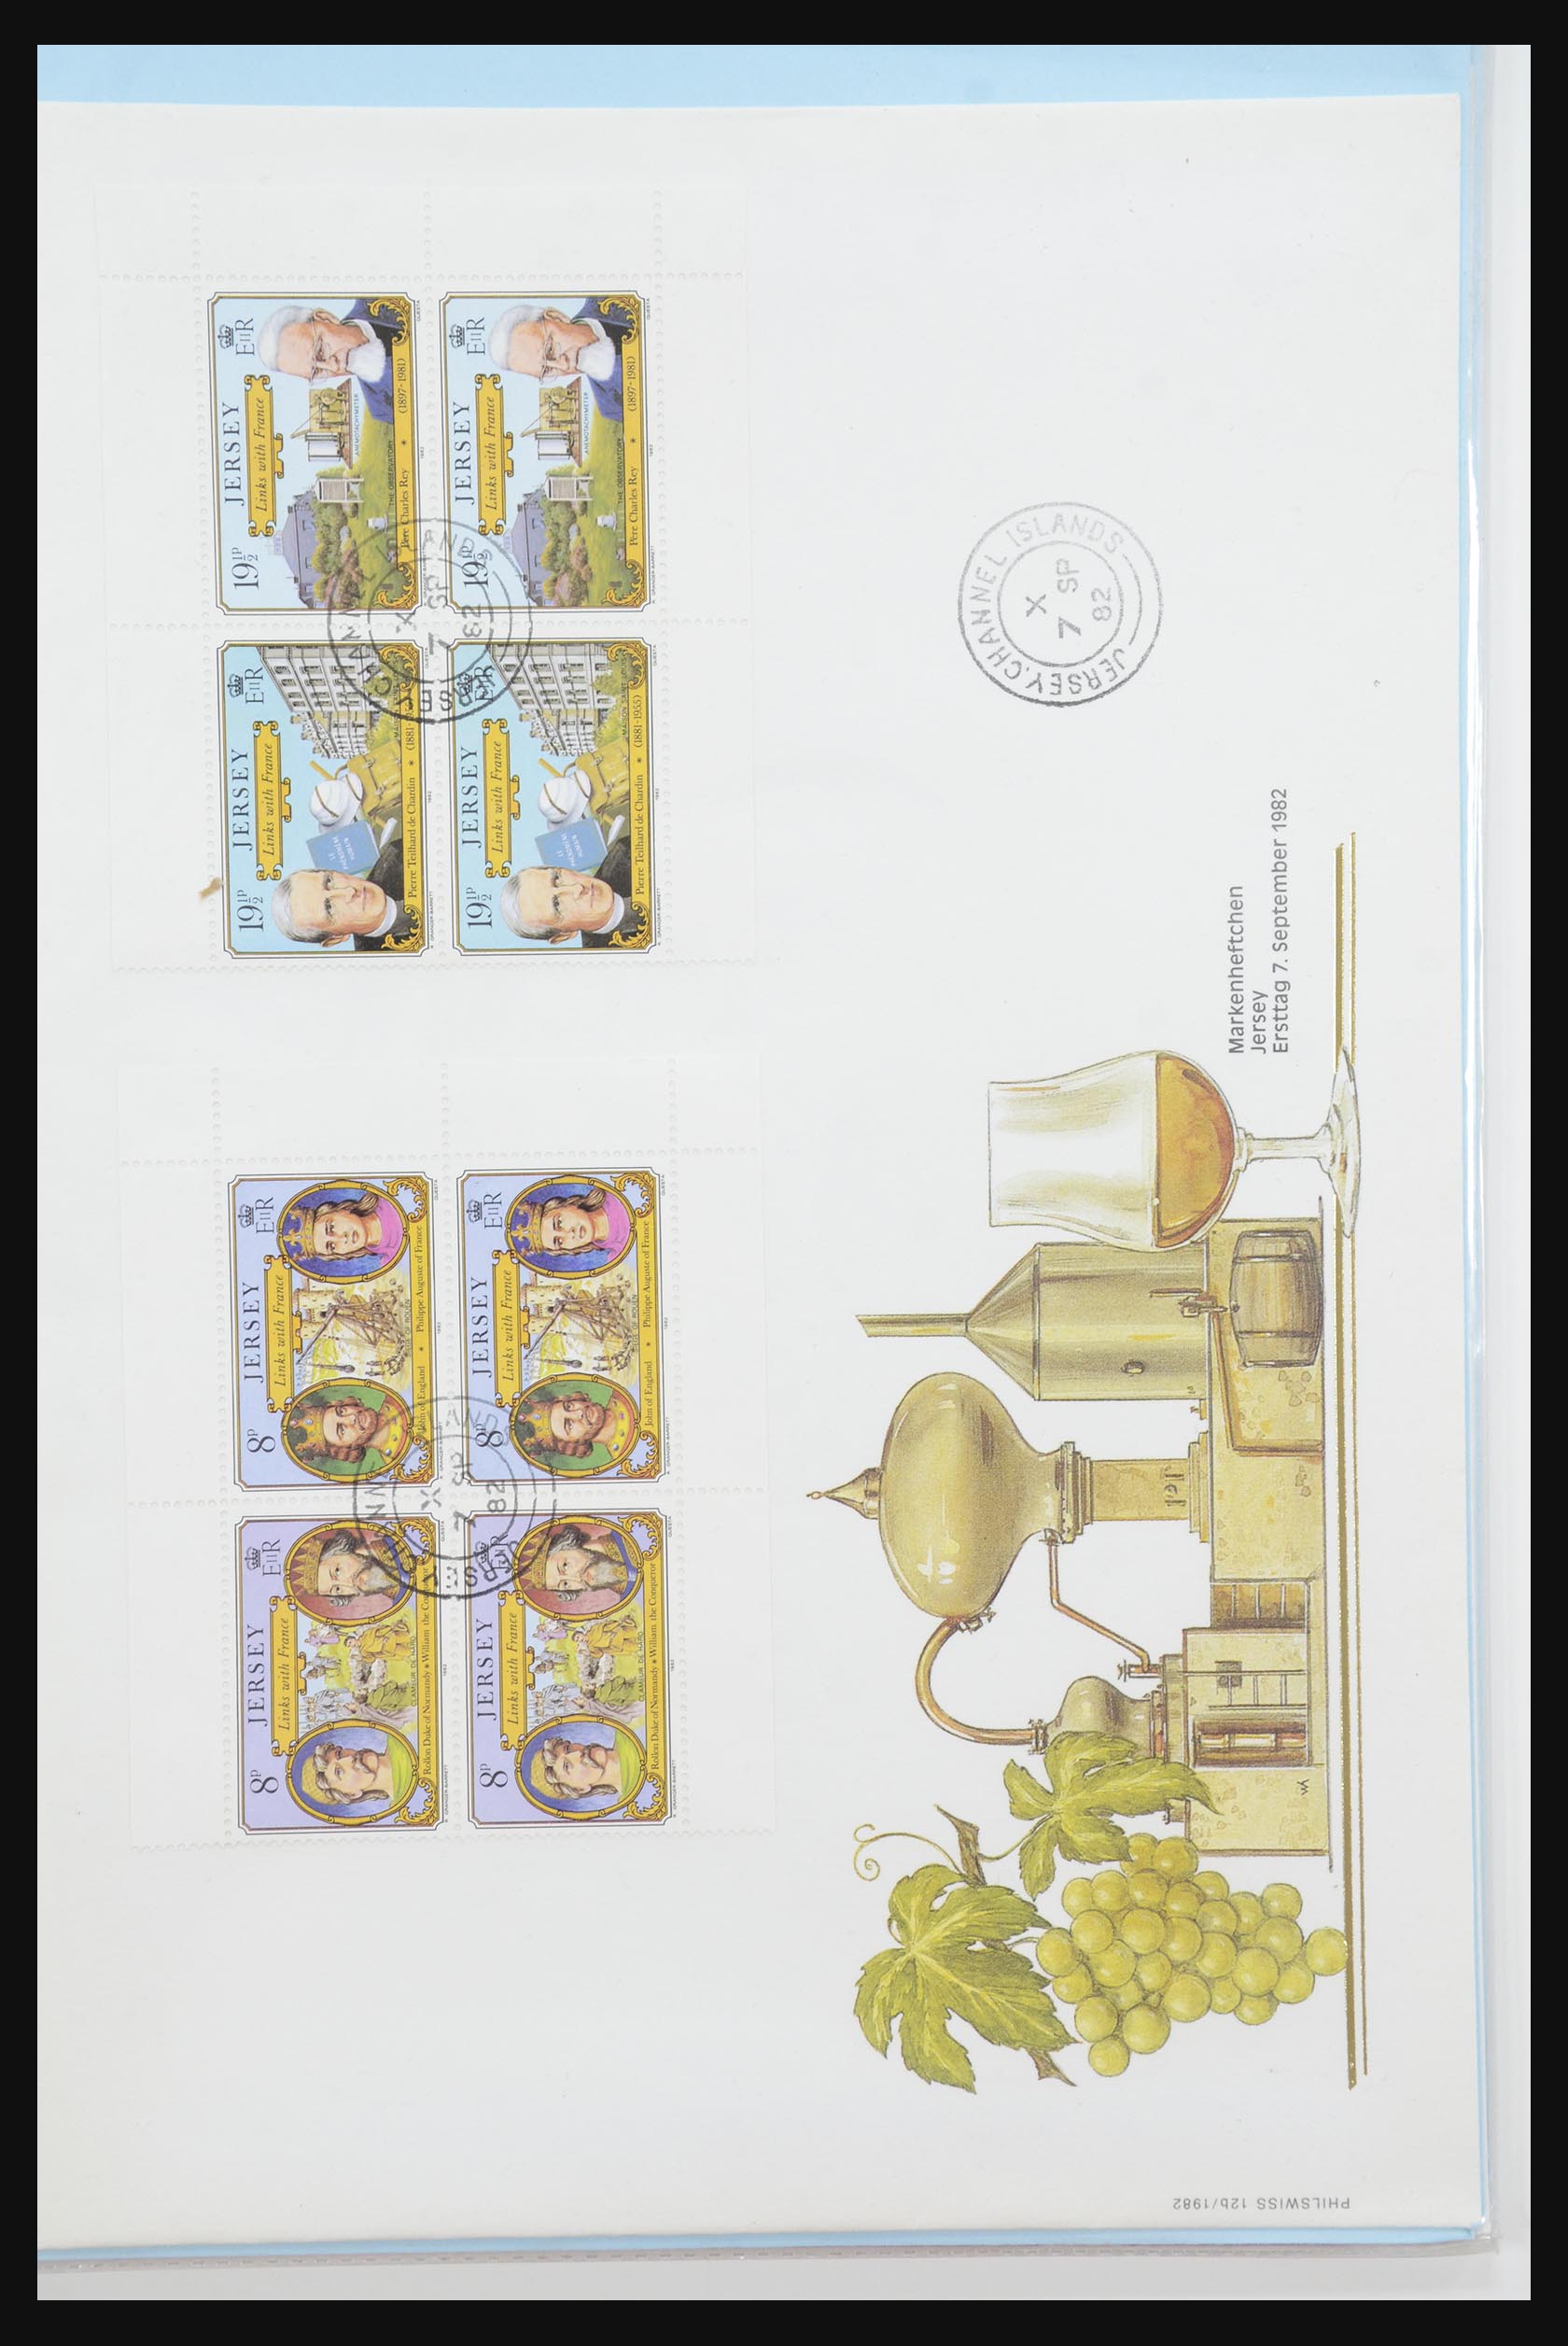 31915 080 - 31915 Western Europe souvenir sheets and stamp booklets on FDC.